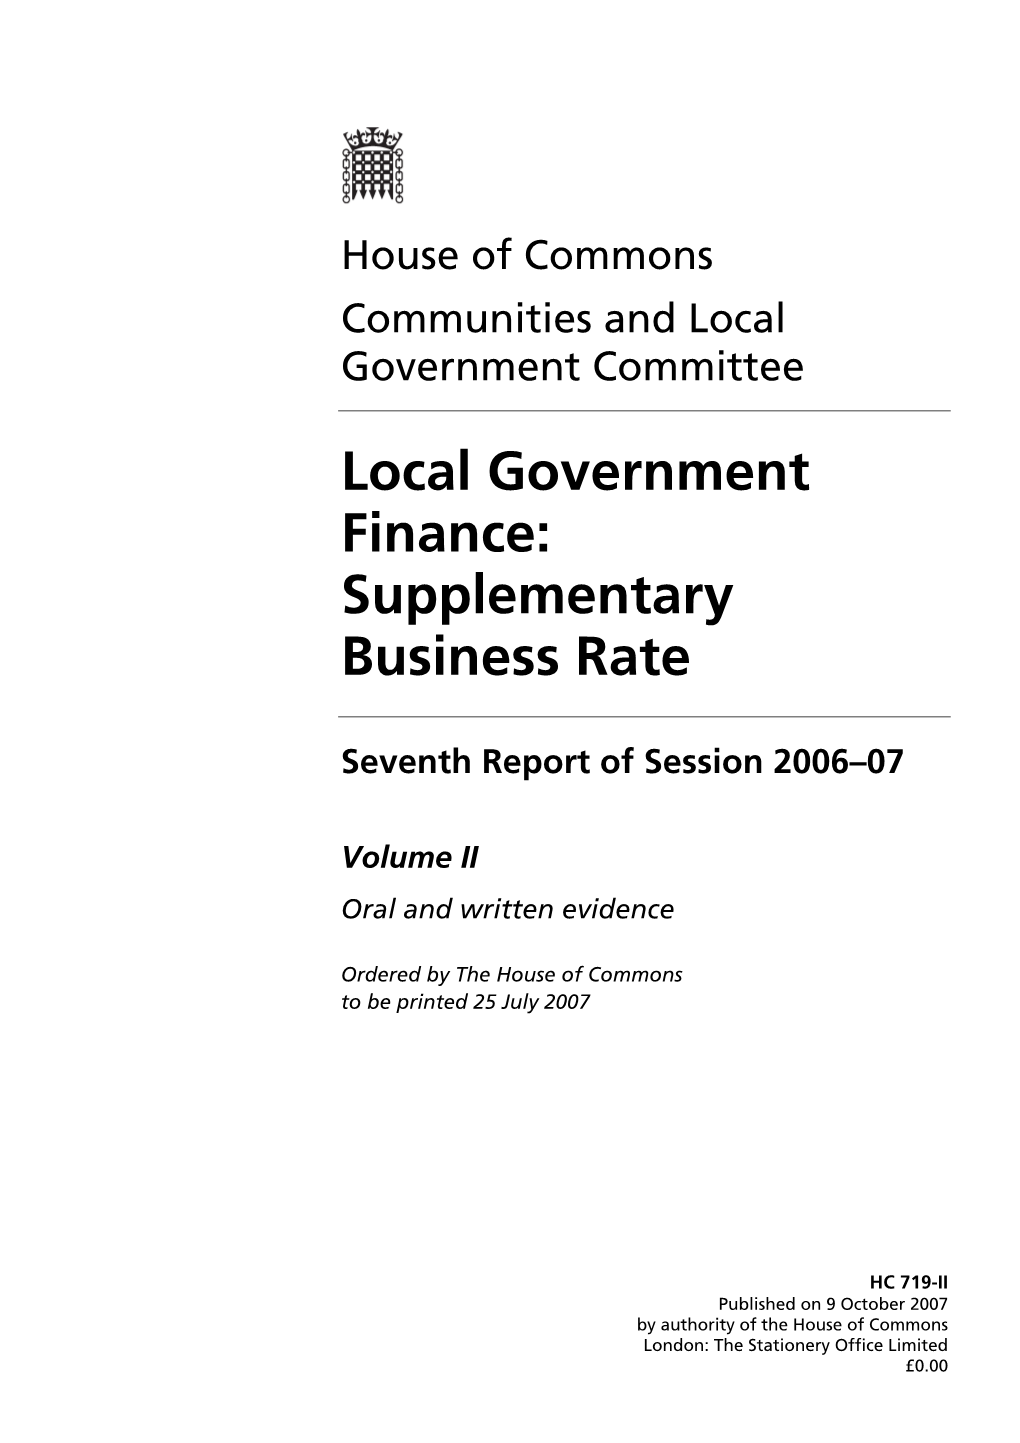 Local Government Finance: Supplementary Business Rate